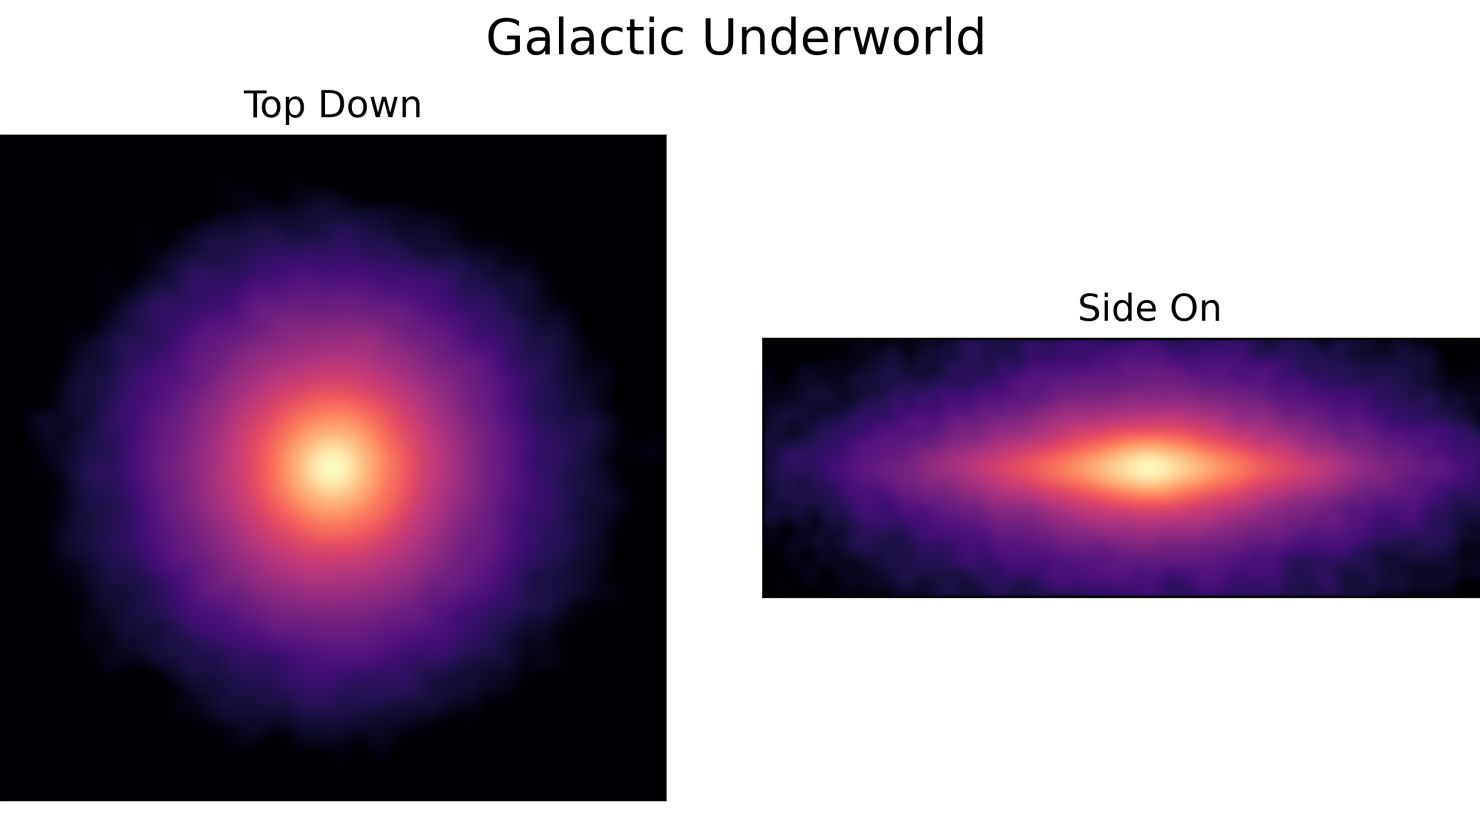 A recent study uncovered the Milky Way's "galactic underworld," mapping the galaxy's region of ancient dead stars.